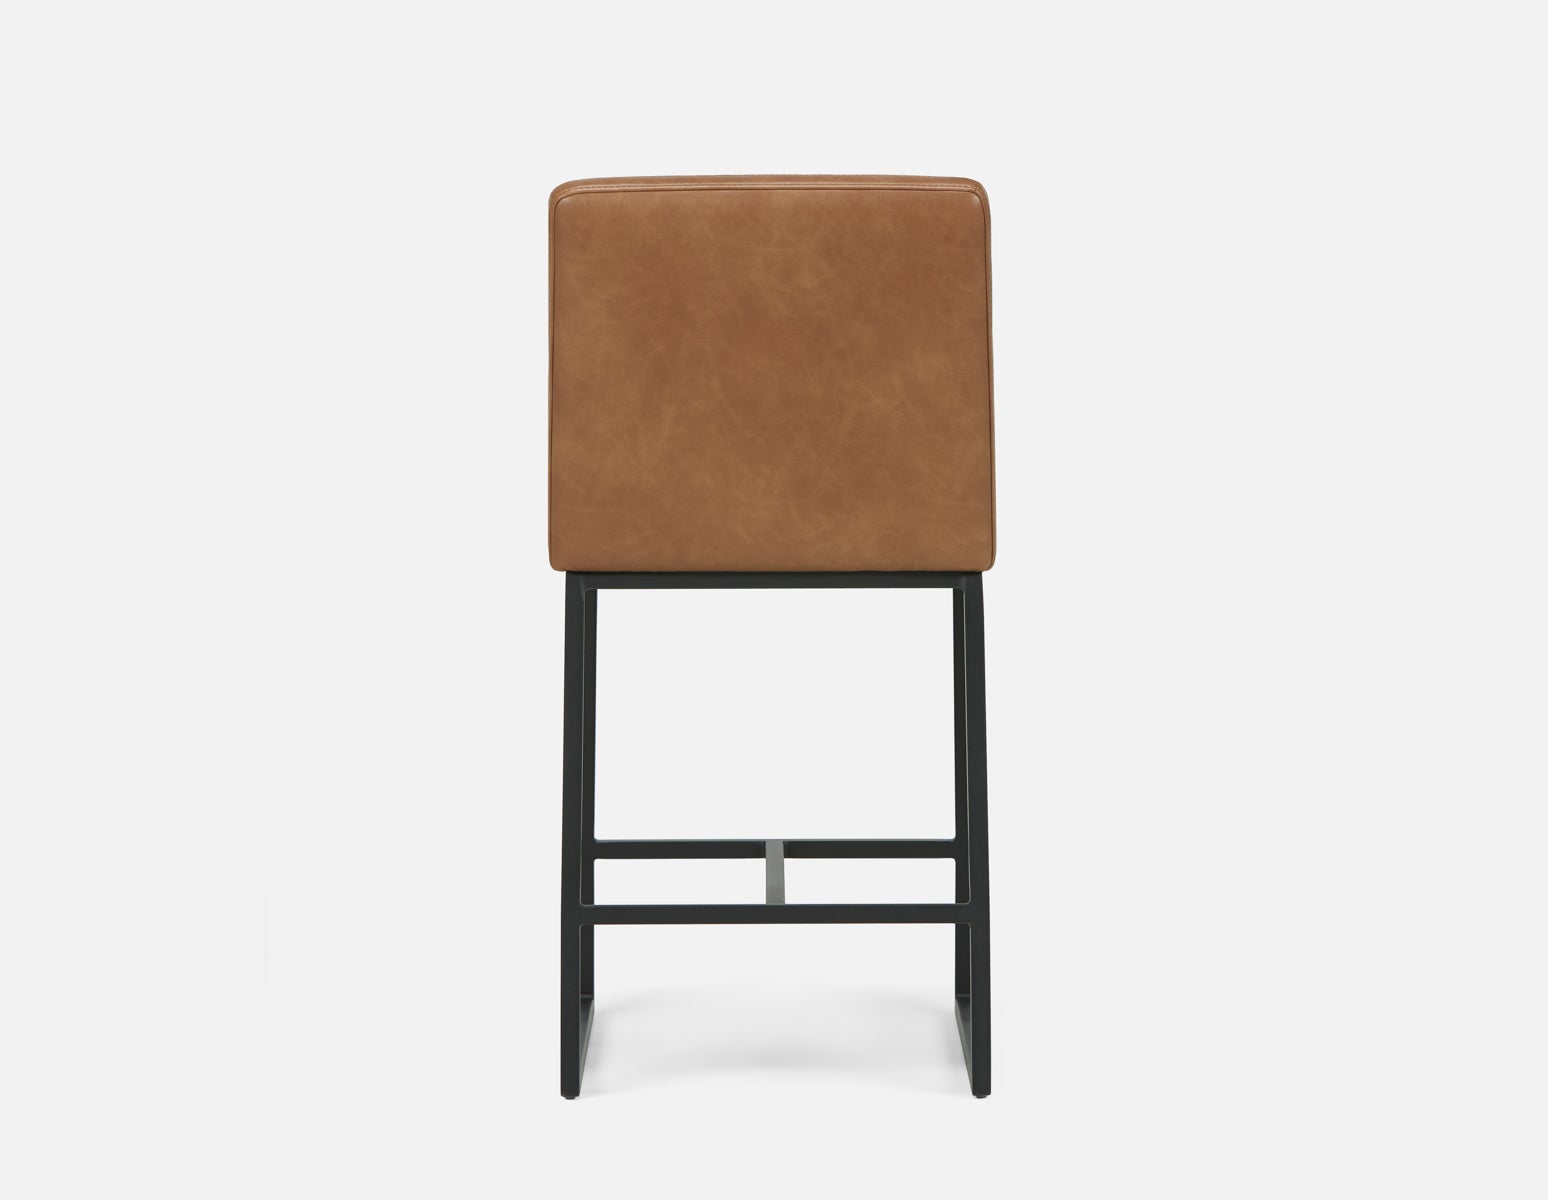 BARI synthetic leather counter stool 66 cm